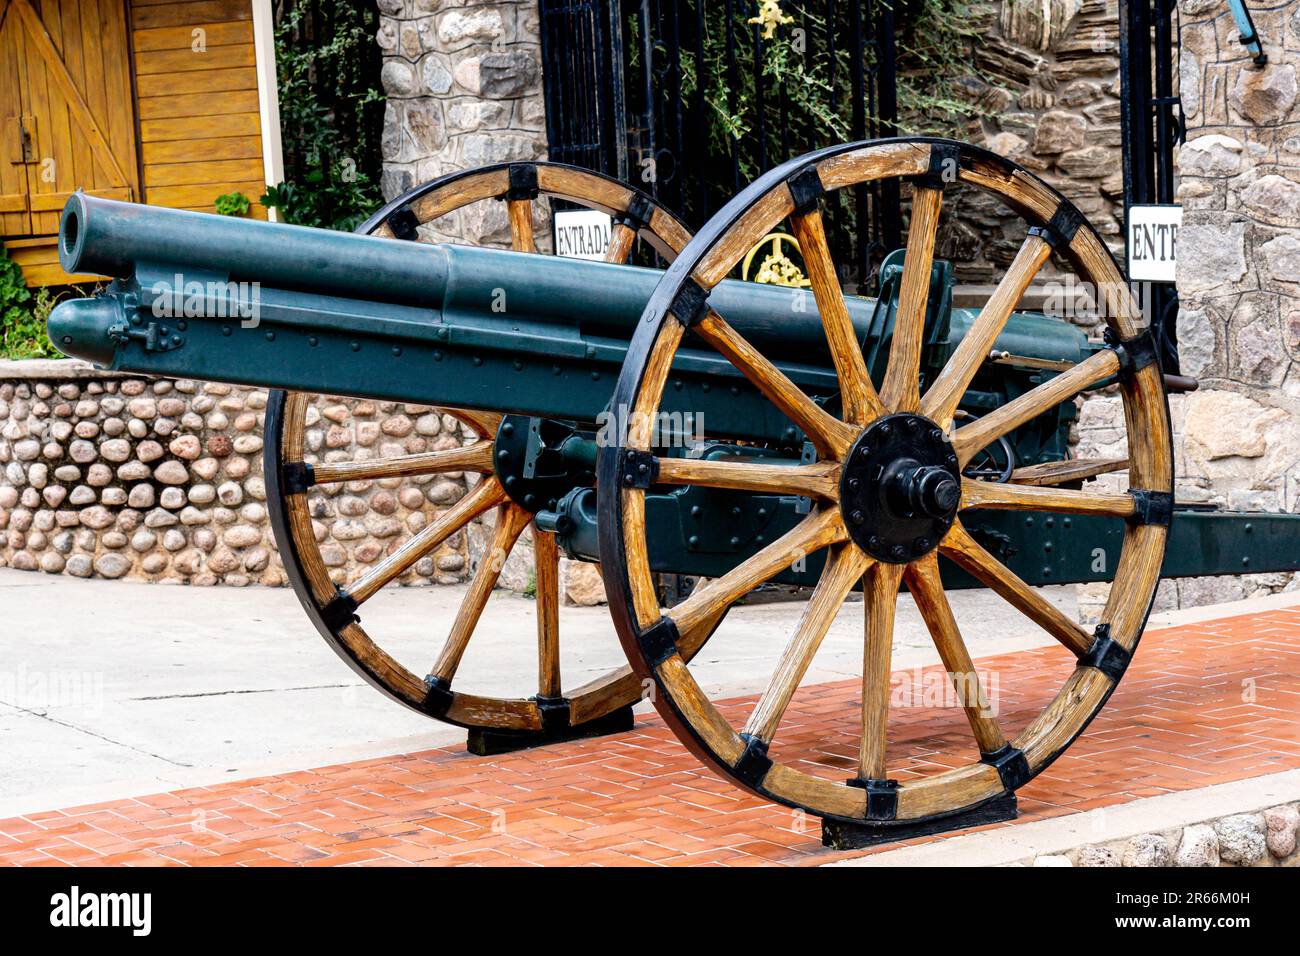 A vintage cannon is displayed prominently in a courtyard featuring red brick walls, with a cobblestone floor and a well-manicured lawn Stock Photo